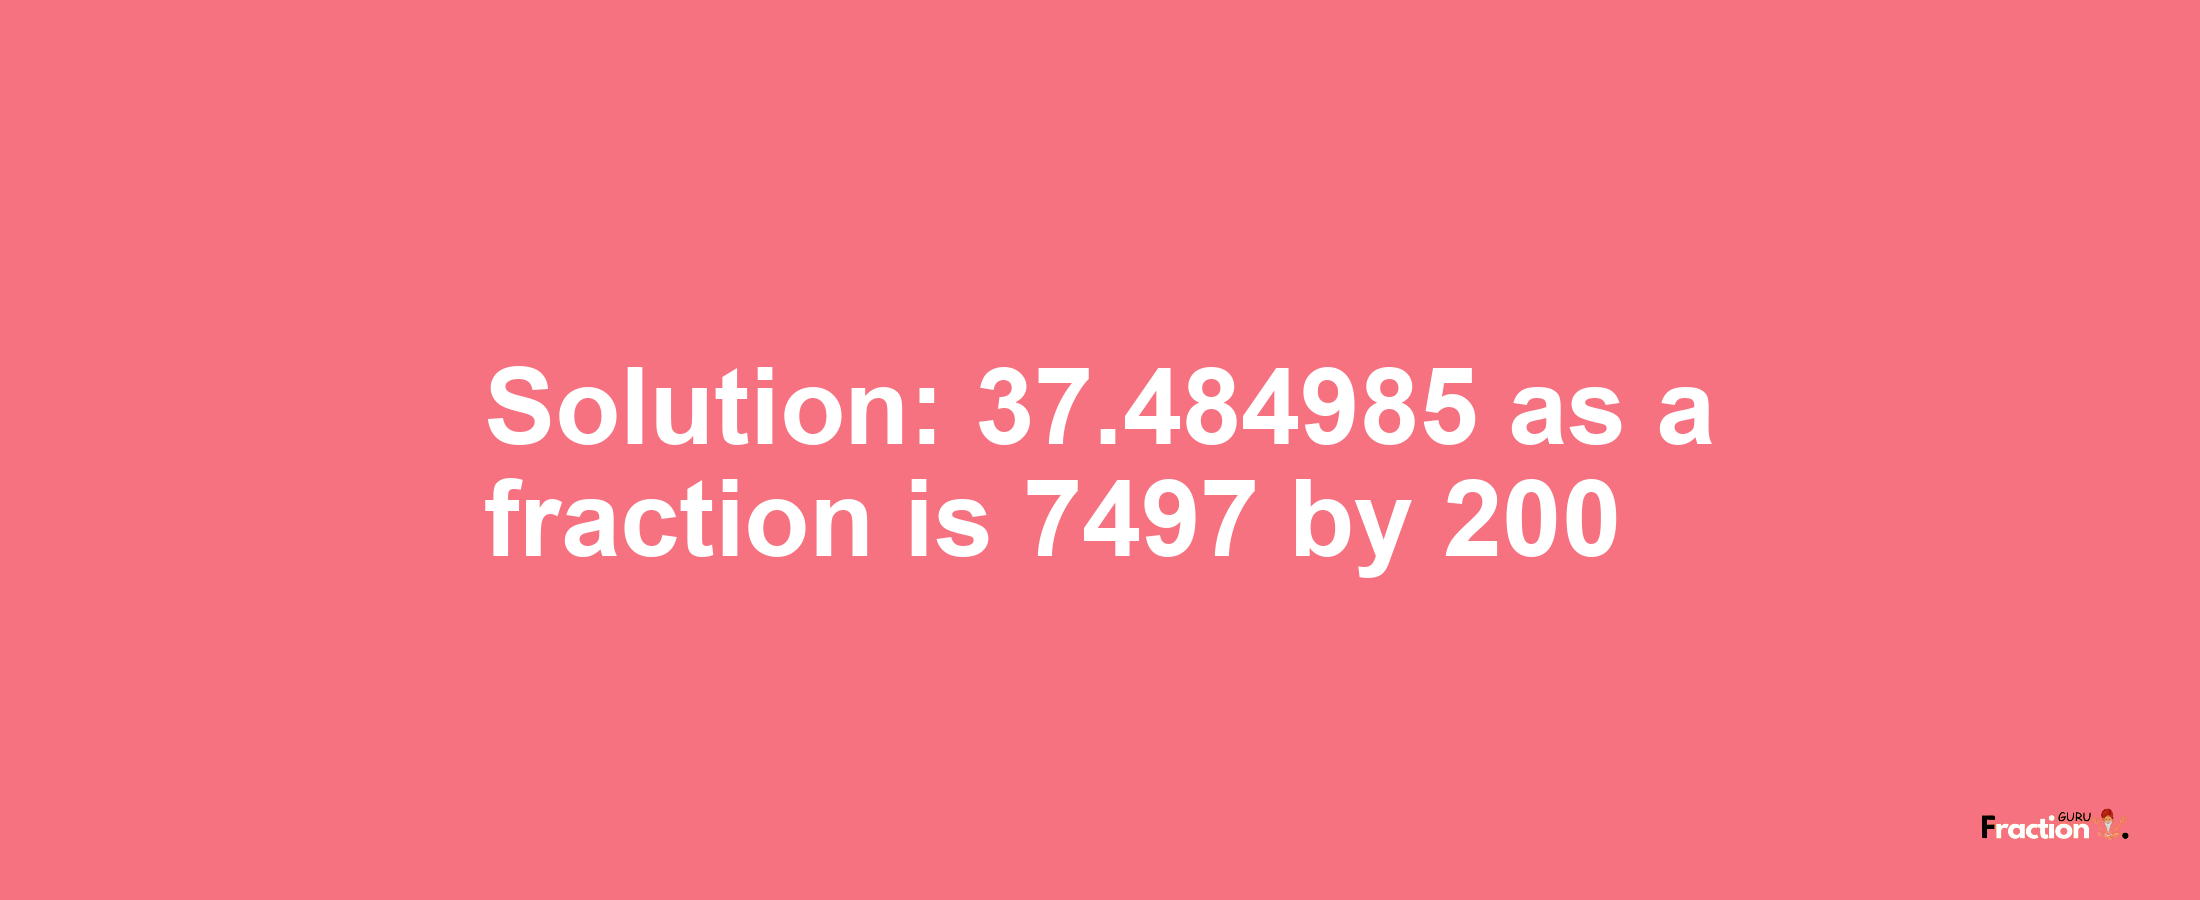 Solution:37.484985 as a fraction is 7497/200